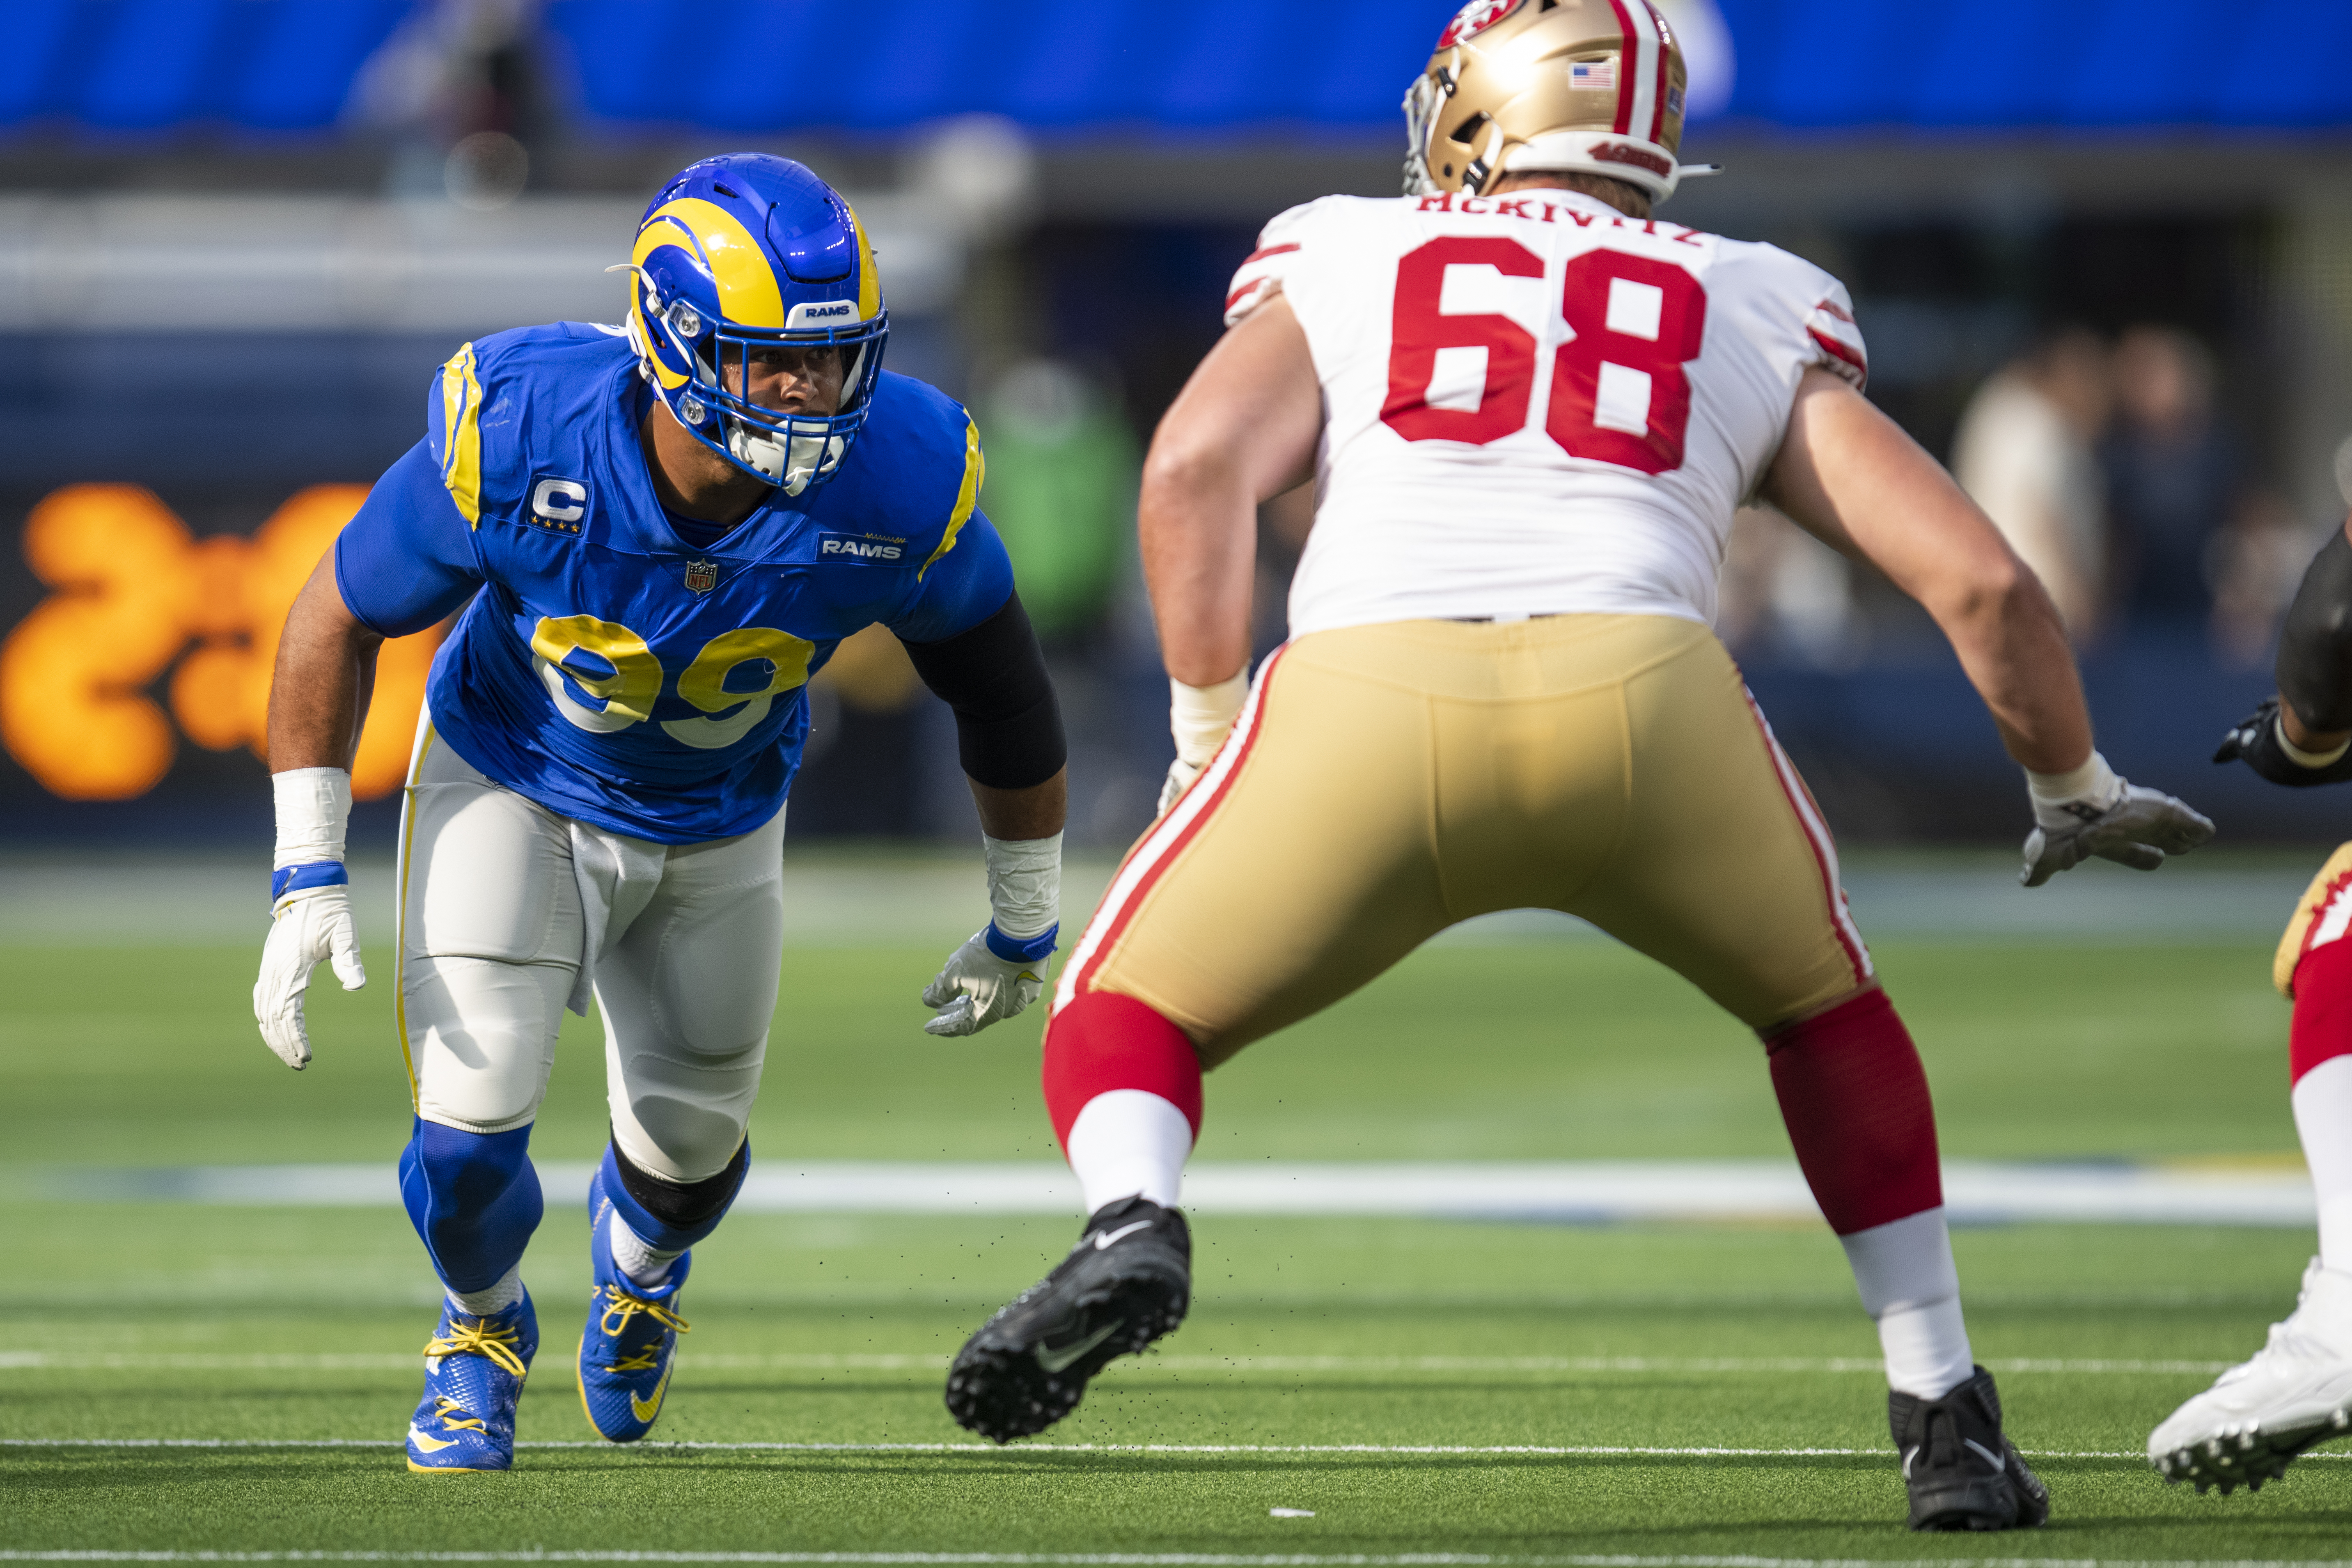 49ers vs. Rams NFC Championship Game: Round 3, for a trip to the